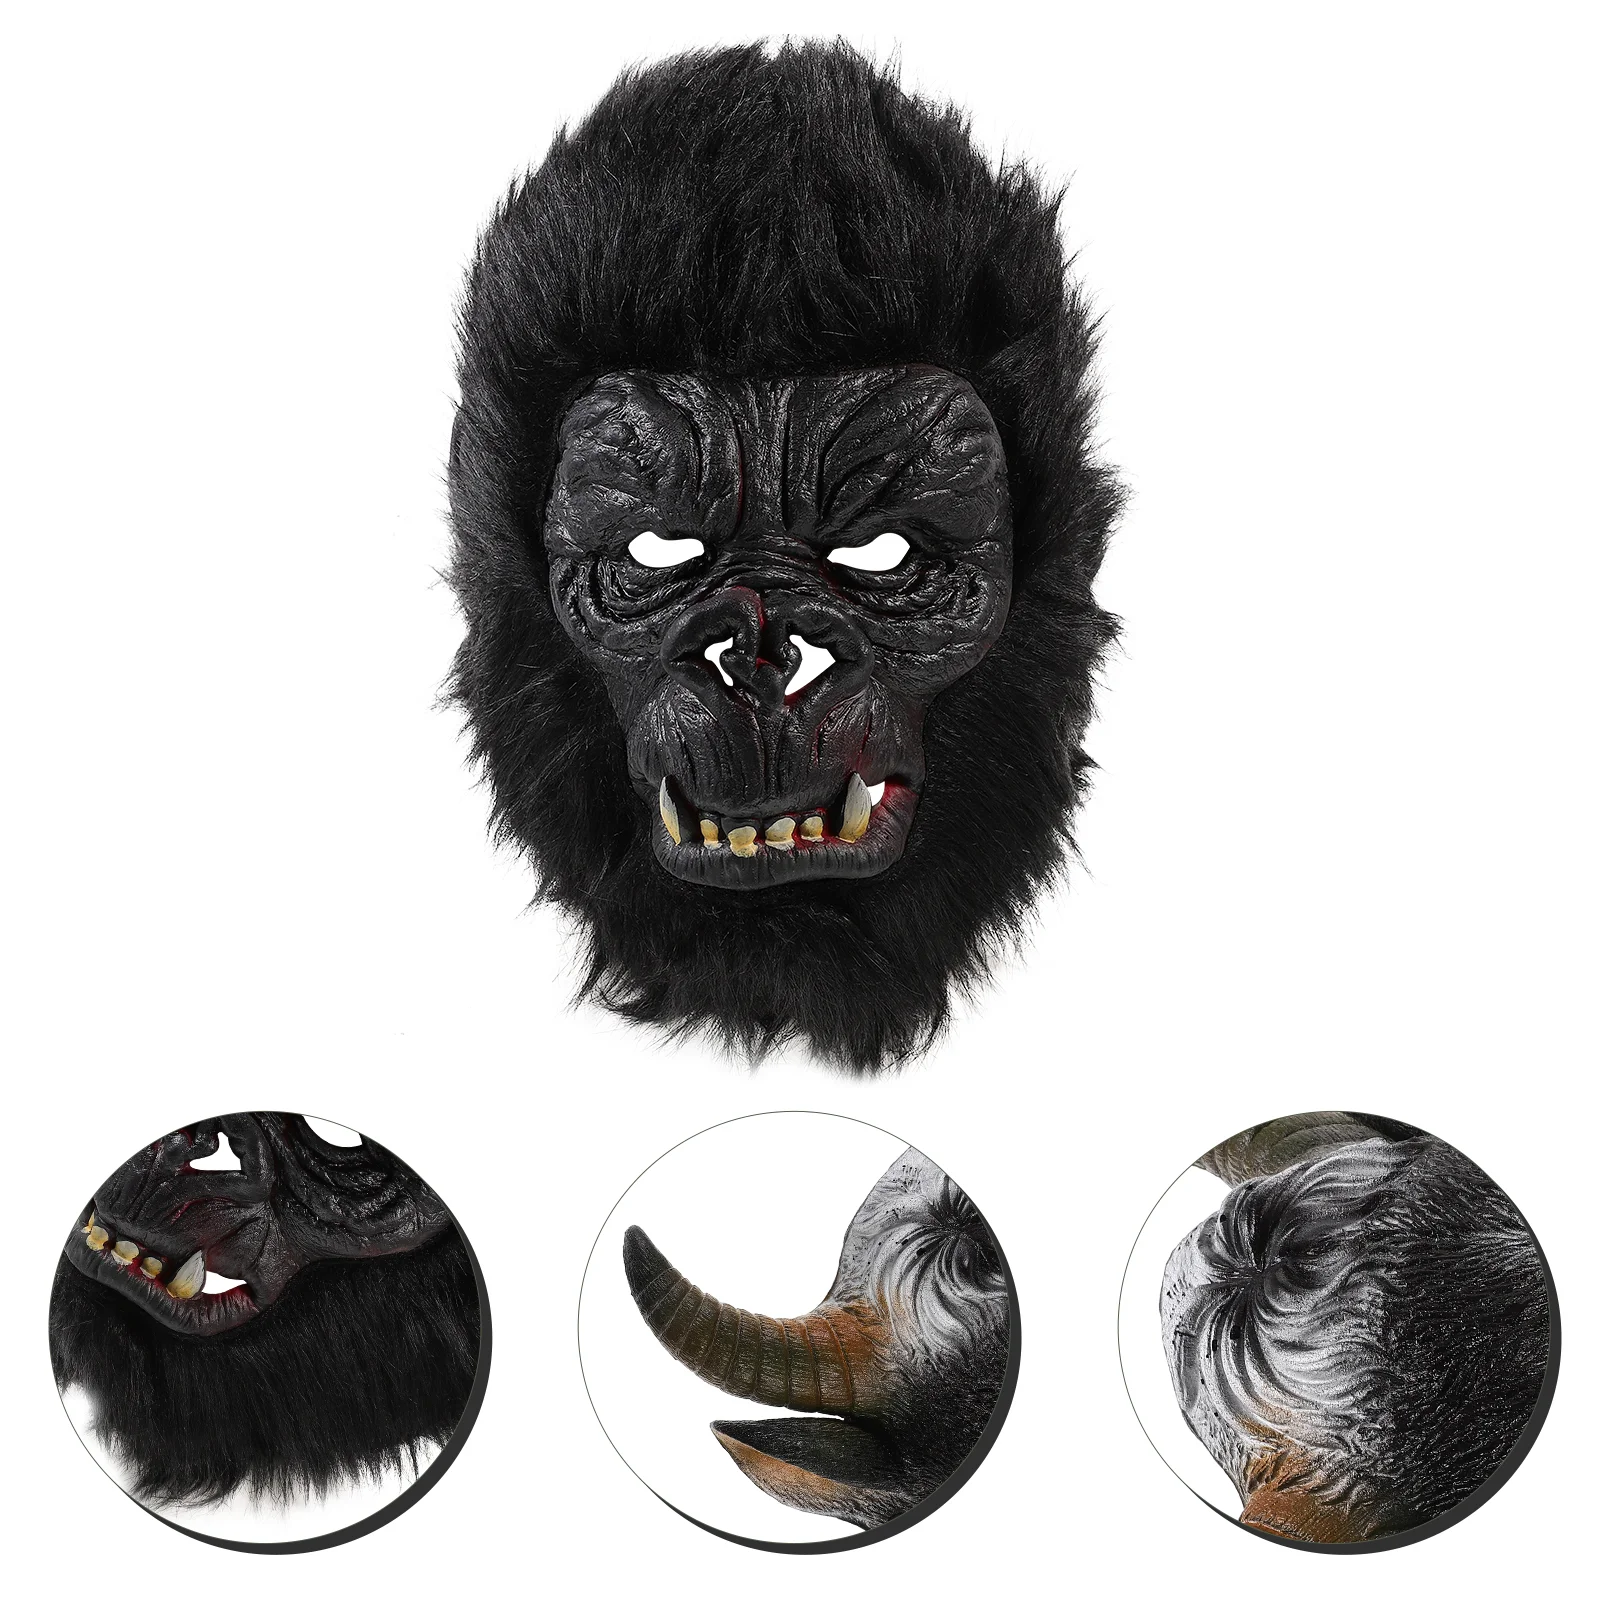 

Animal Gorilla Head Mask Novelty Halloween Dressing Up Costume For Party Props